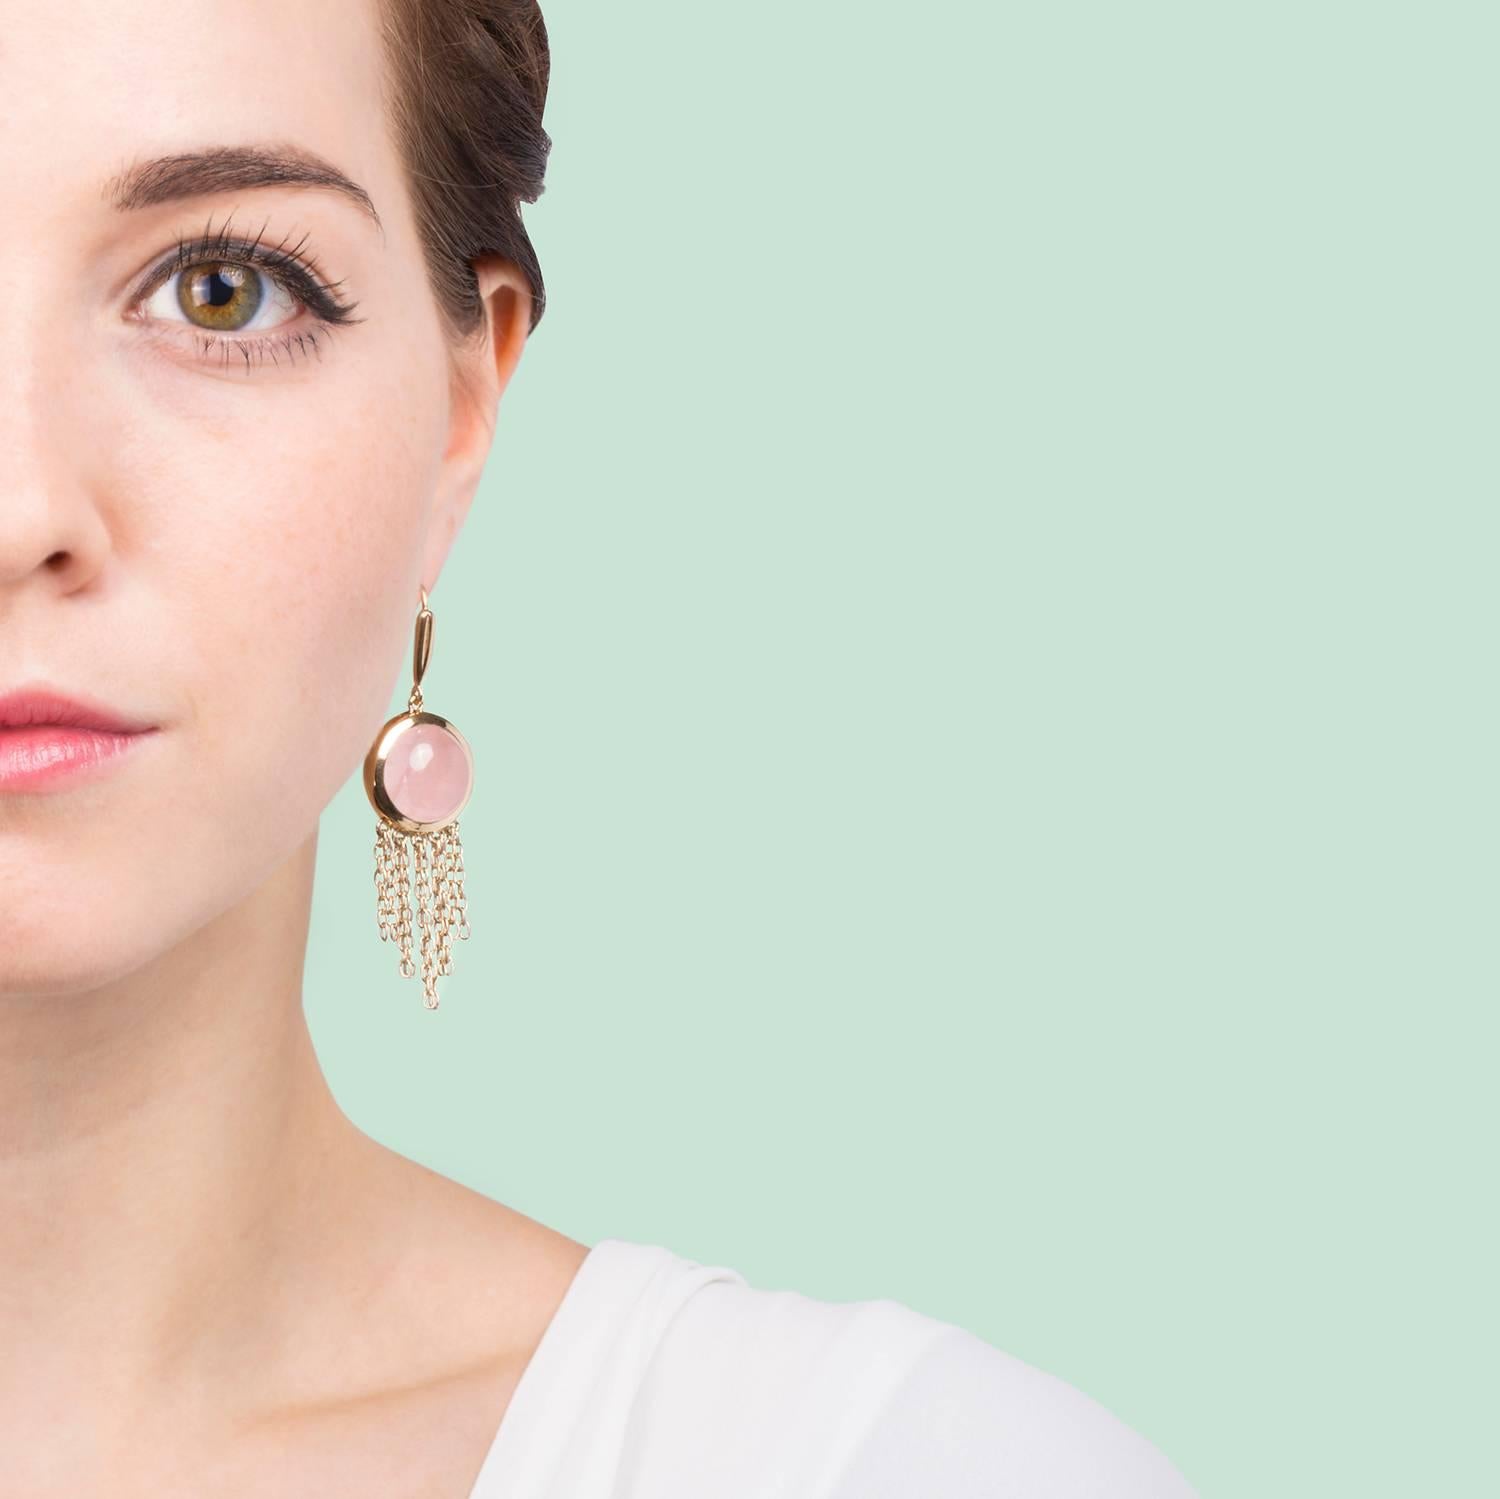 18kt Gold Vermeil (2.5 microns) on 925 Silver (Rhodium coated to enhance the colour of the metal)

These light and delicate chain earrings are perfect for day wear or special occasions.

They feature natural pink quartz cabochons with hanging